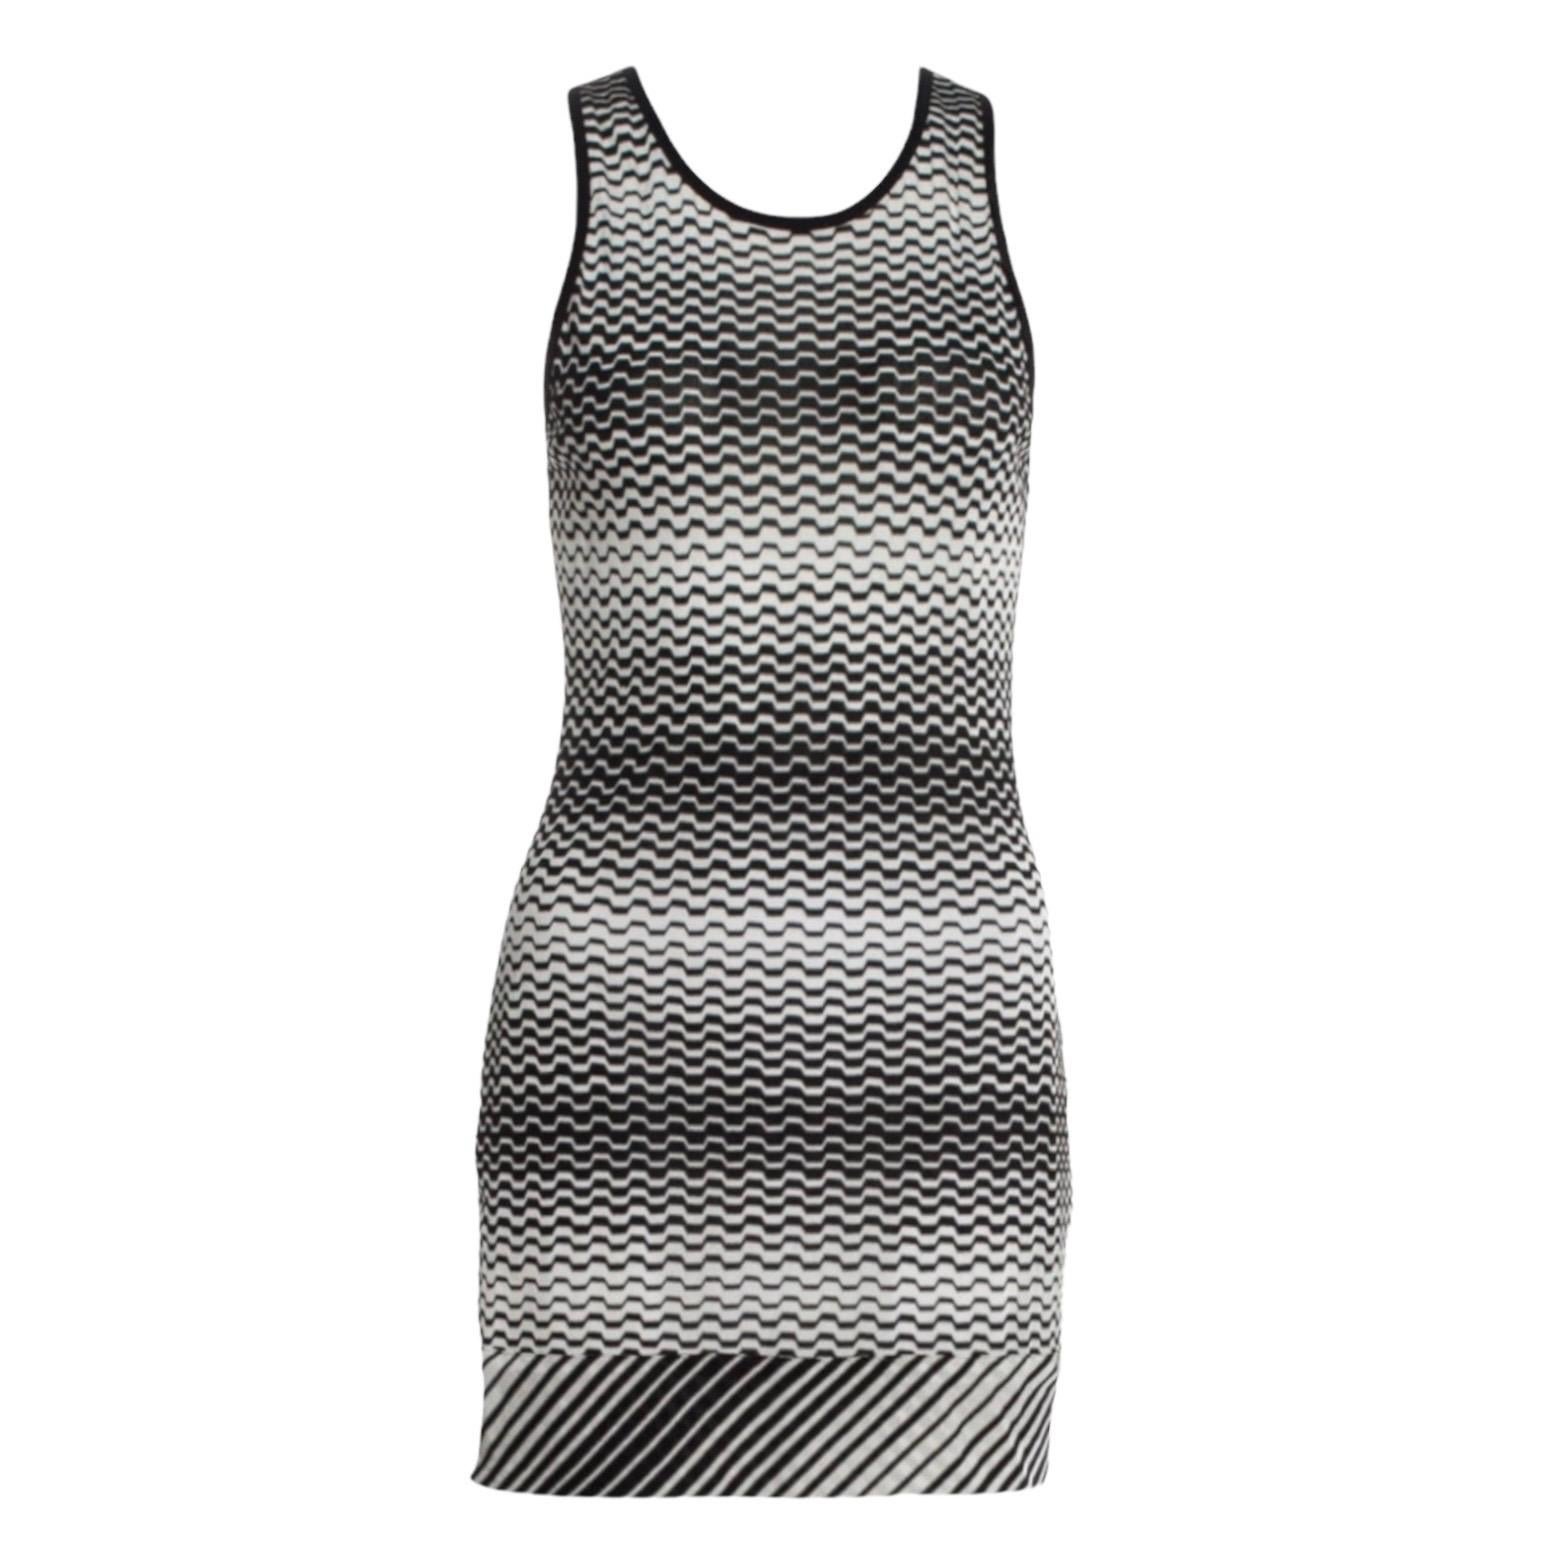 
Missoni's monochrome striped dress has been crafted in Italy using the label's signature crochet-knit technique. The amazing shape makes it perfect for slipping on over a bikini or to dress it up with heels for a night out.


Missoni signature